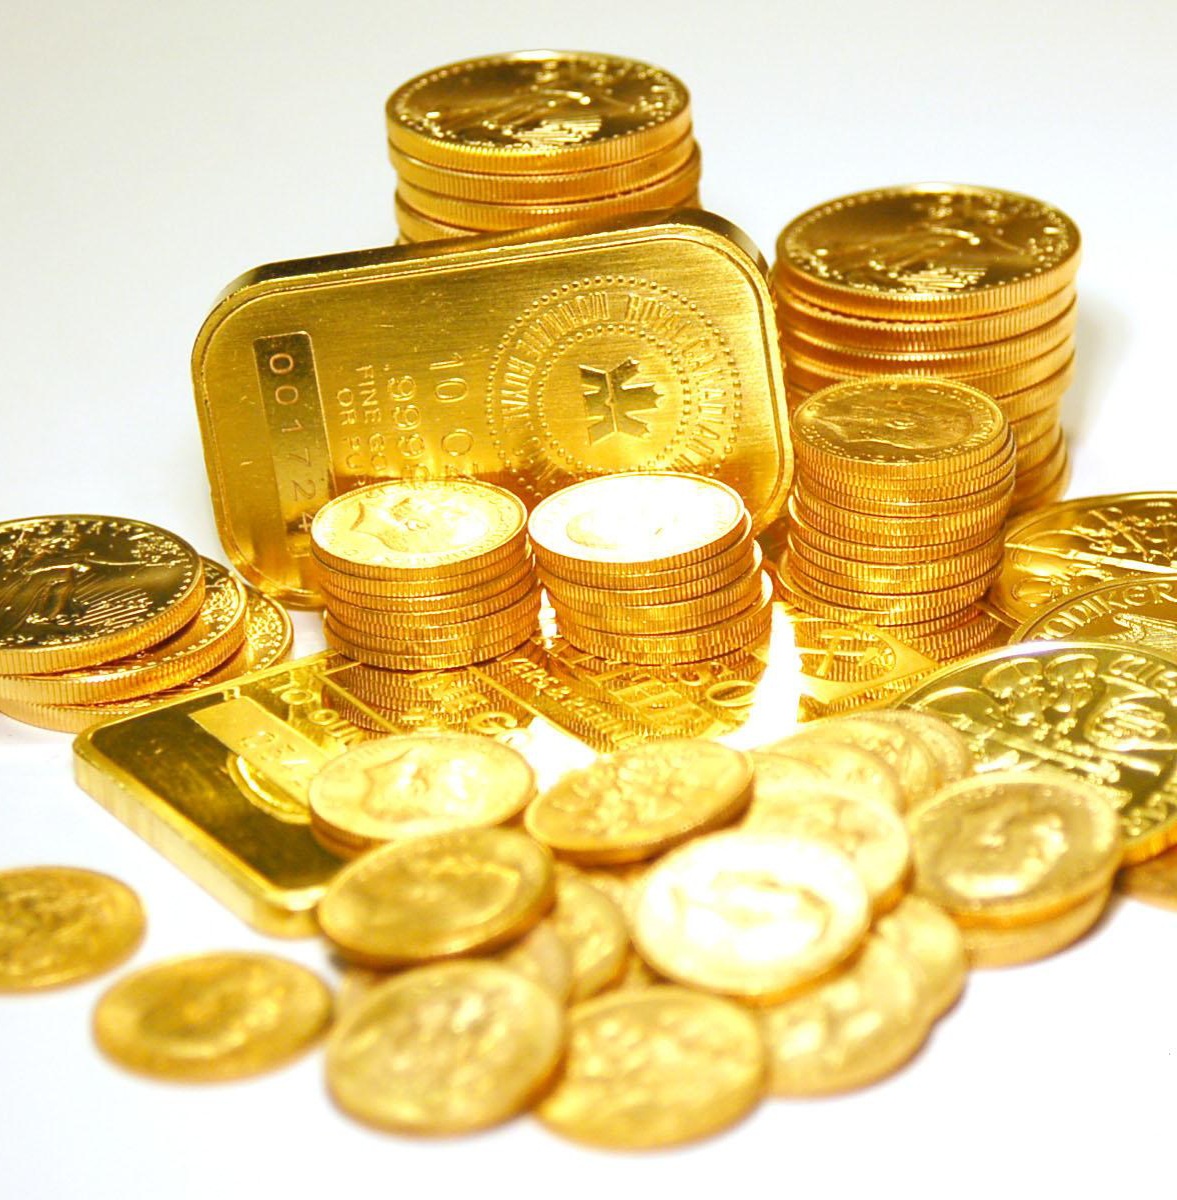 At Bootie's Pawn and Jewelry, we pay cash for gold coins. We pay cash for gold ingots. We are Central Florida's #1 bullion buyer.